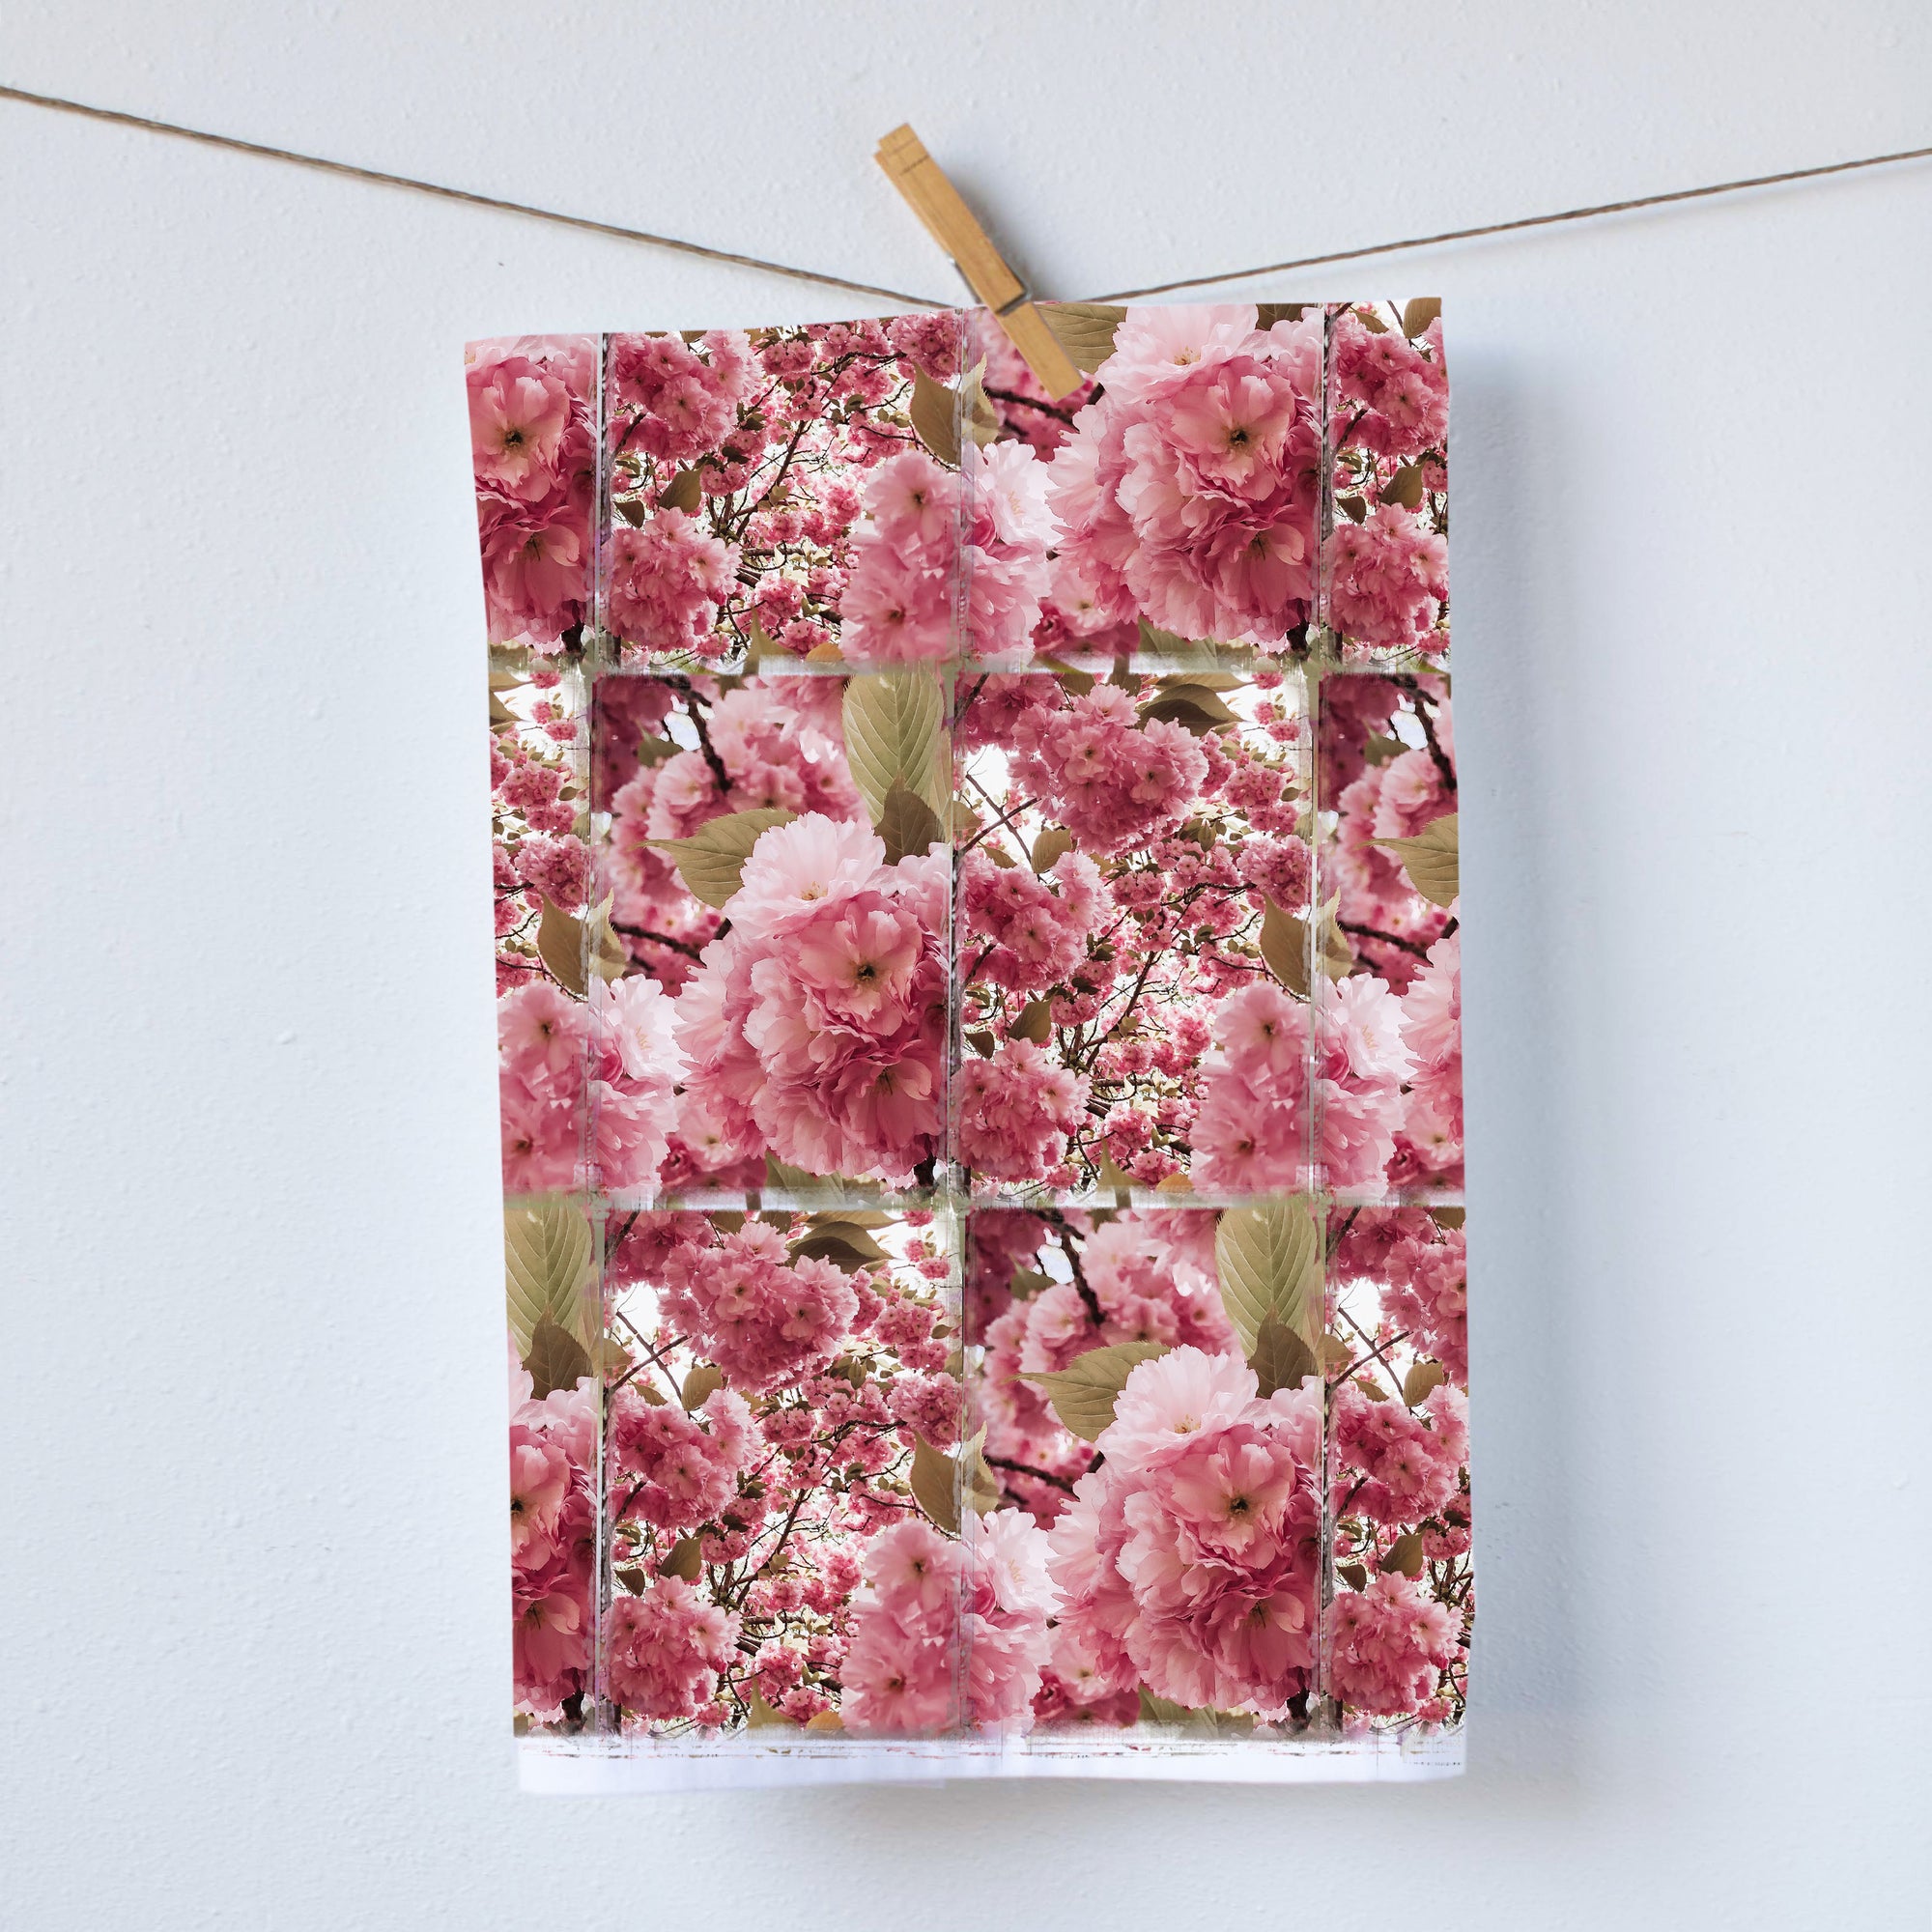 This modern kitchen towel showcases a dynamic assortment of Cherry Blossoms, making it an ideal gift or stylish accent with distinct flair.  Our dish towels are a perfect combination of style and practicality. Size: 19"x 28" Print size 16"x18" 100%  Cotton Gift Ready Packed Machine wash  Exclusively at Red BIrd's House Copyright owned by Pauline Steve